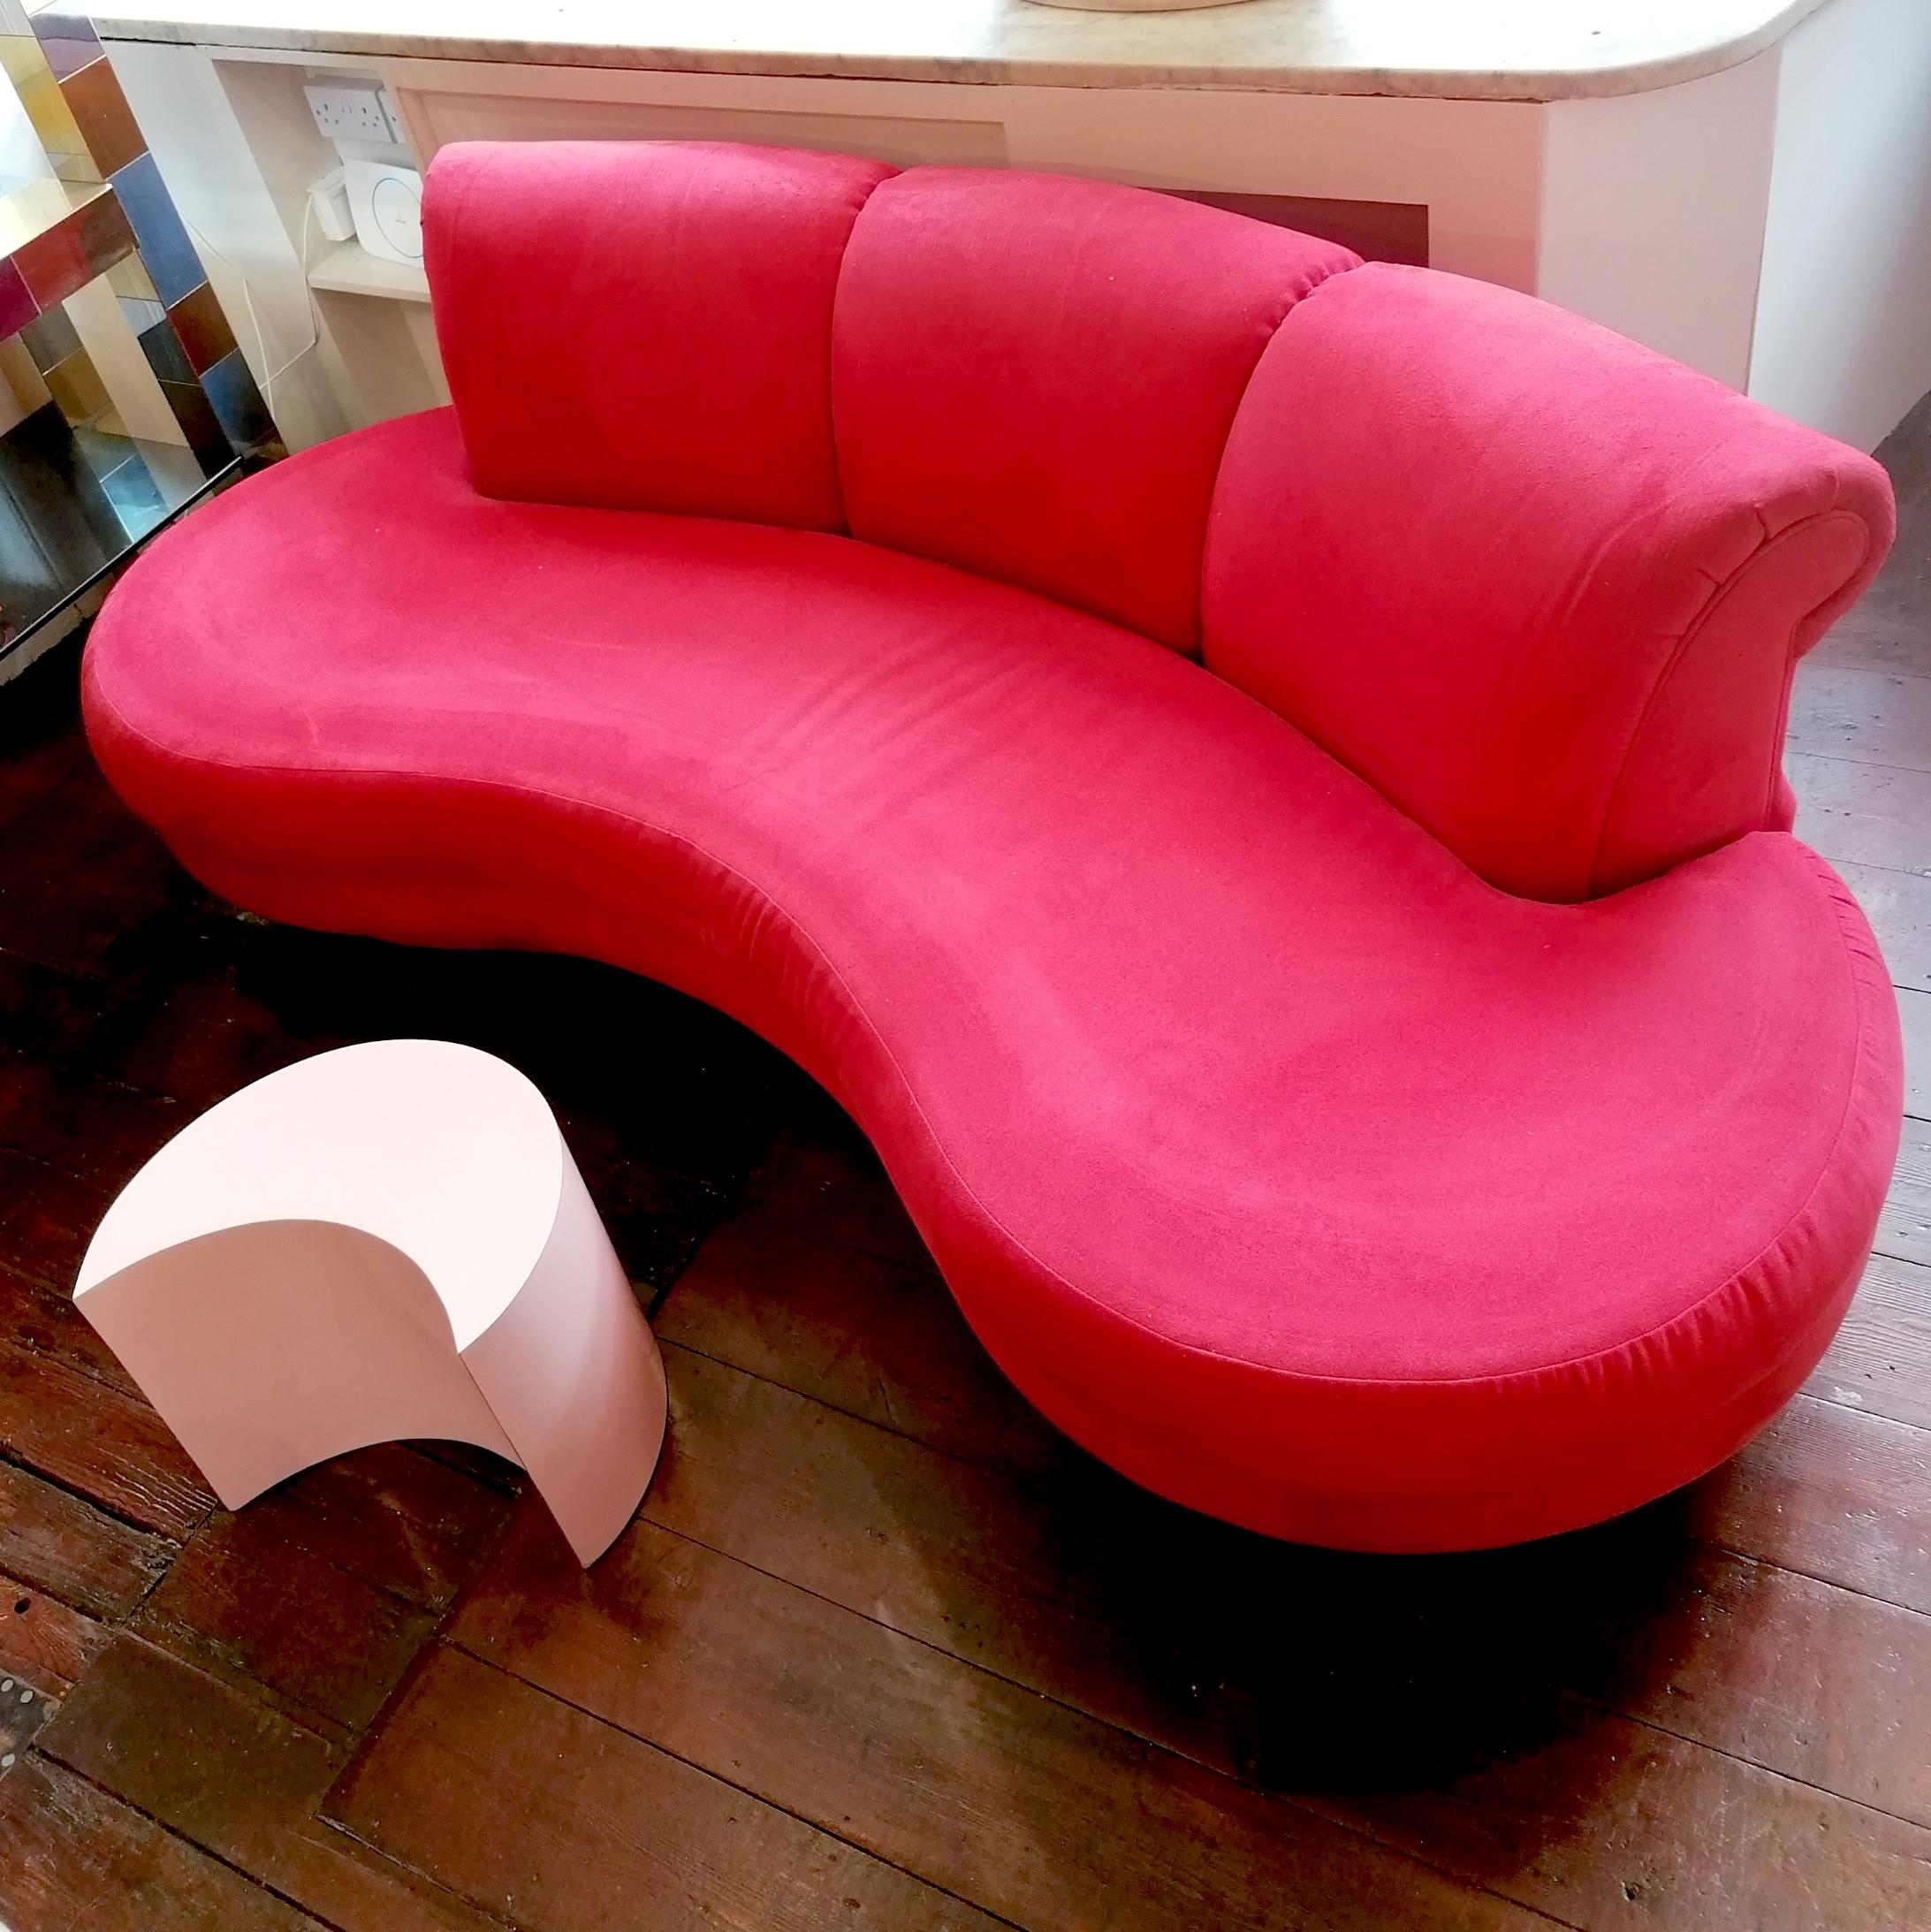 Sculptural curved cloud sofa by Adrian Pearsall for Comfort Designs, USA 1980s.  2